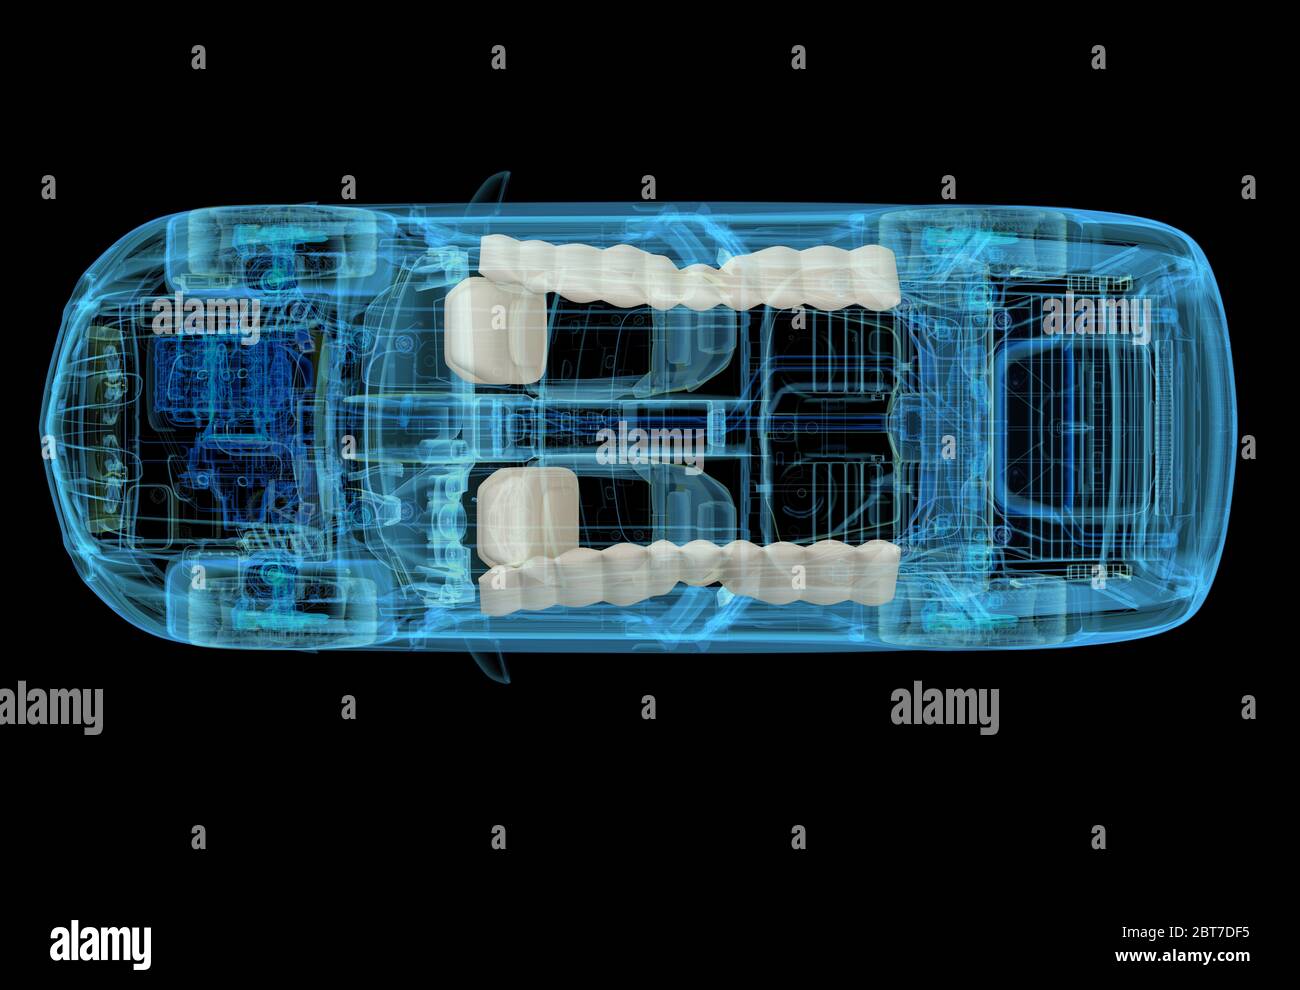 Technical 3d illustration of SUV car with xray effect and airbags system. Top view on black background. Stock Photo